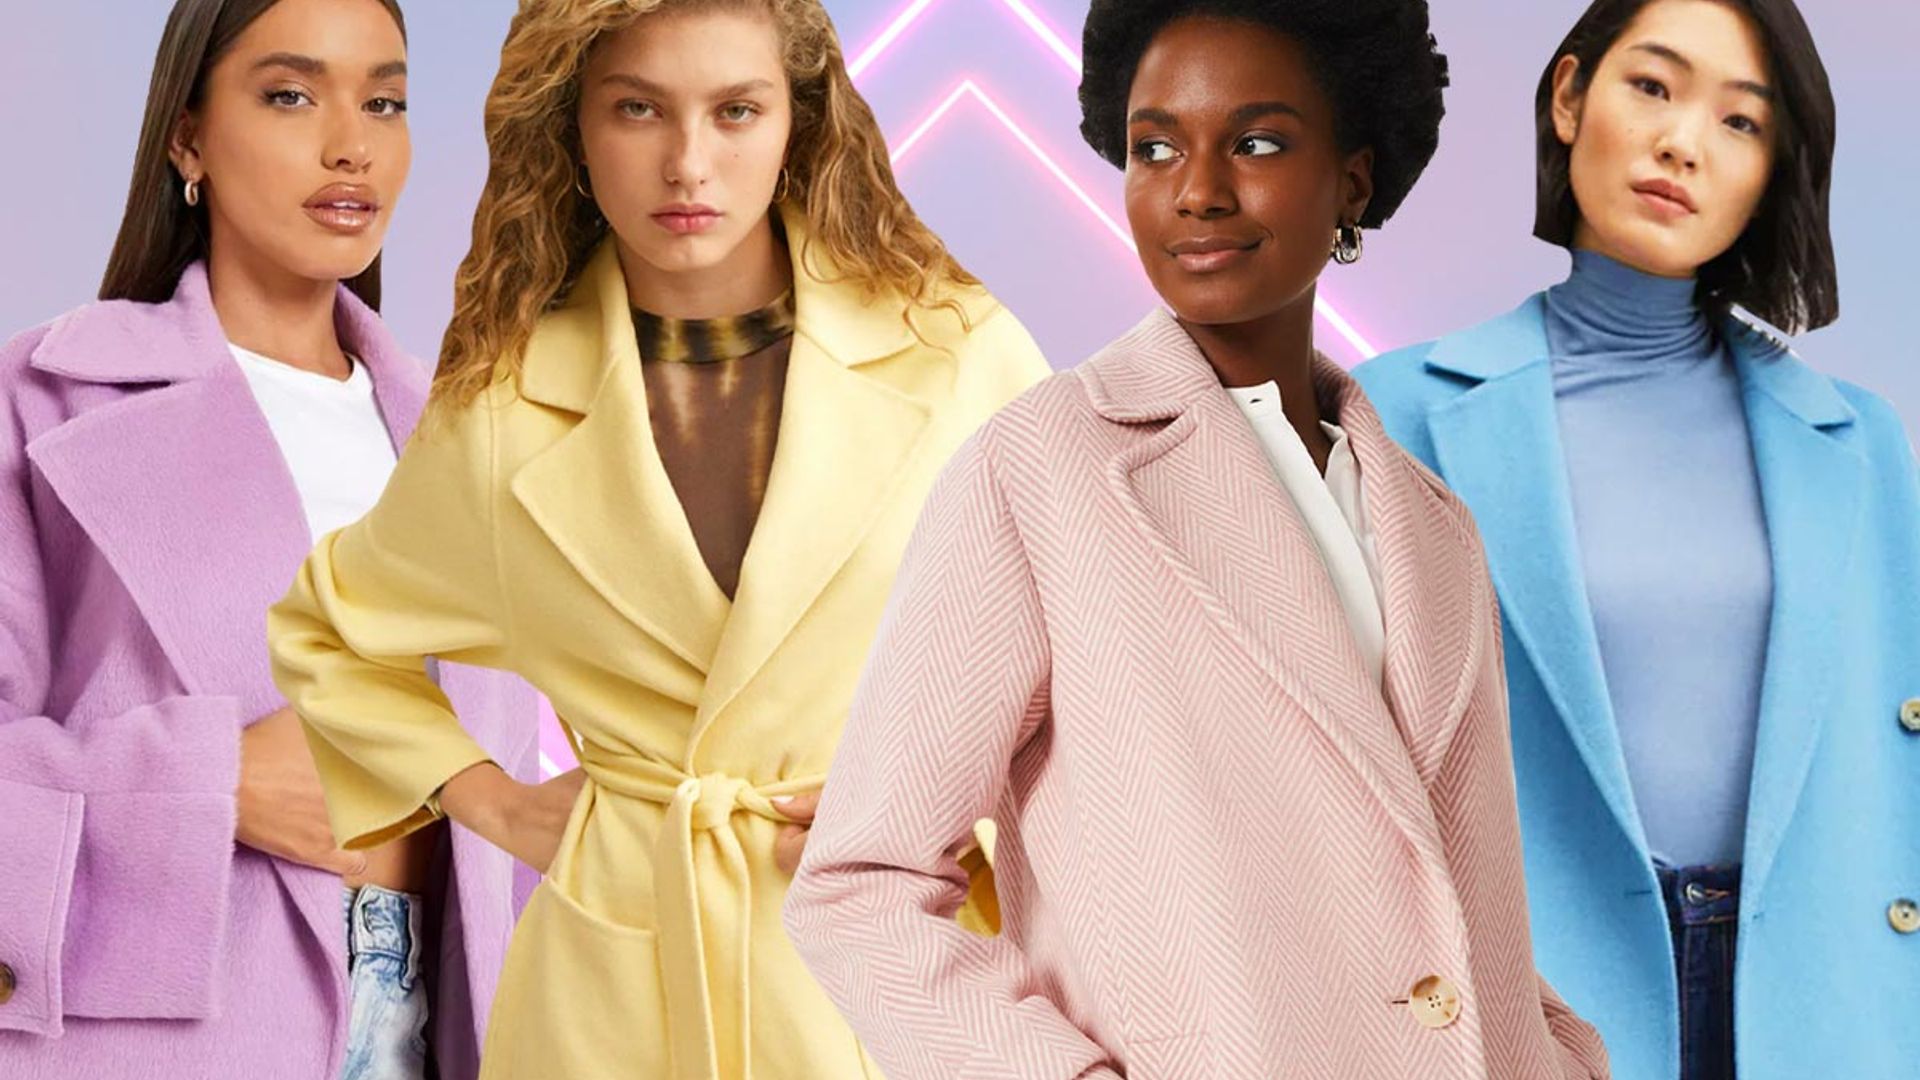 10 best pastel coats for spring: From Marks & Spencer to ASOS and Mango ...